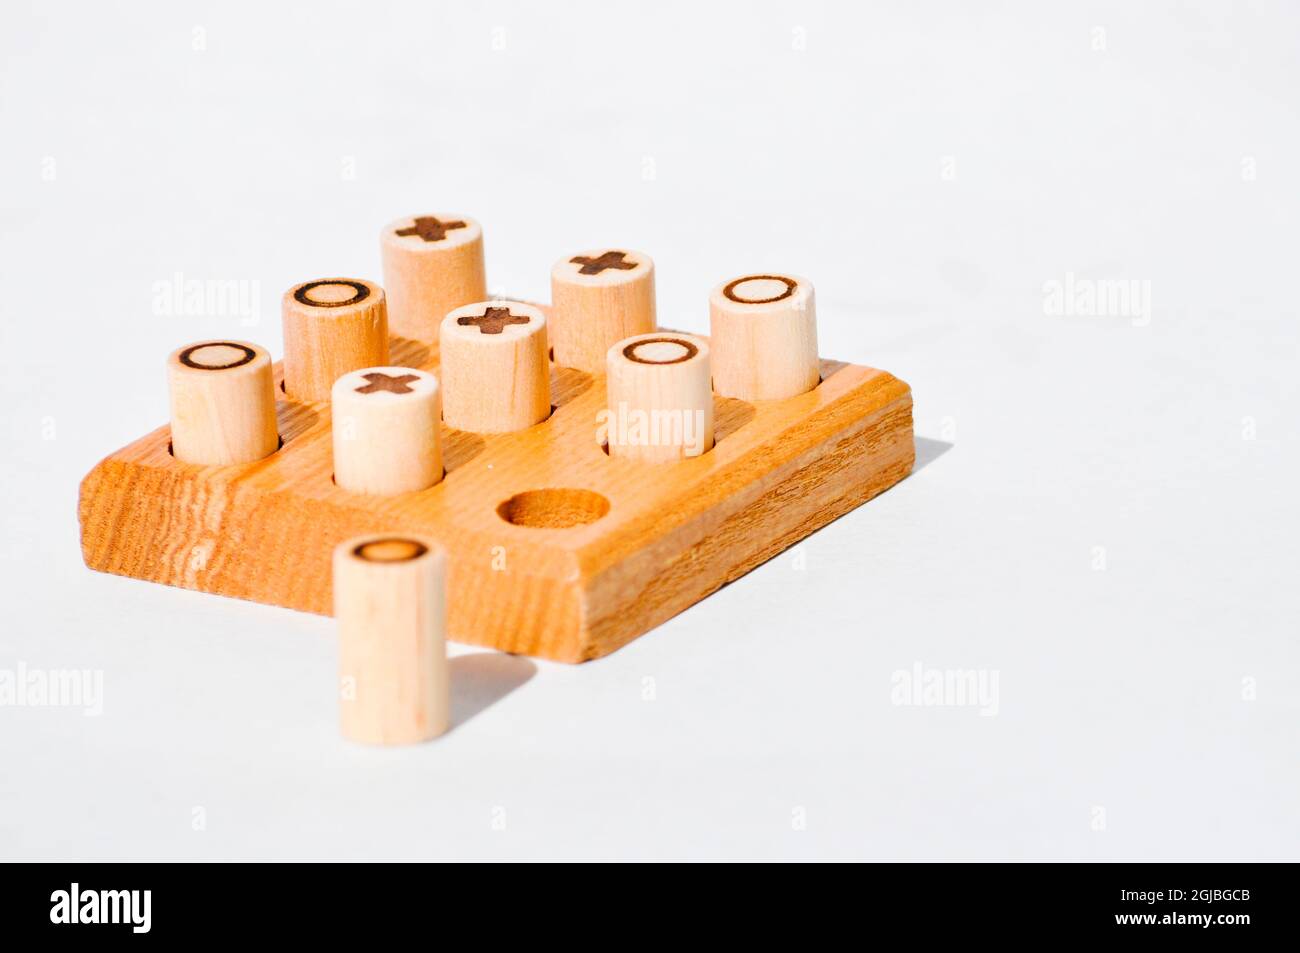 A handcrafted, wooden noughts and crosses set. Pegs are made from dowels of wood with the symbol burnt on. and the board has 9 holes drilled out. Stock Photo